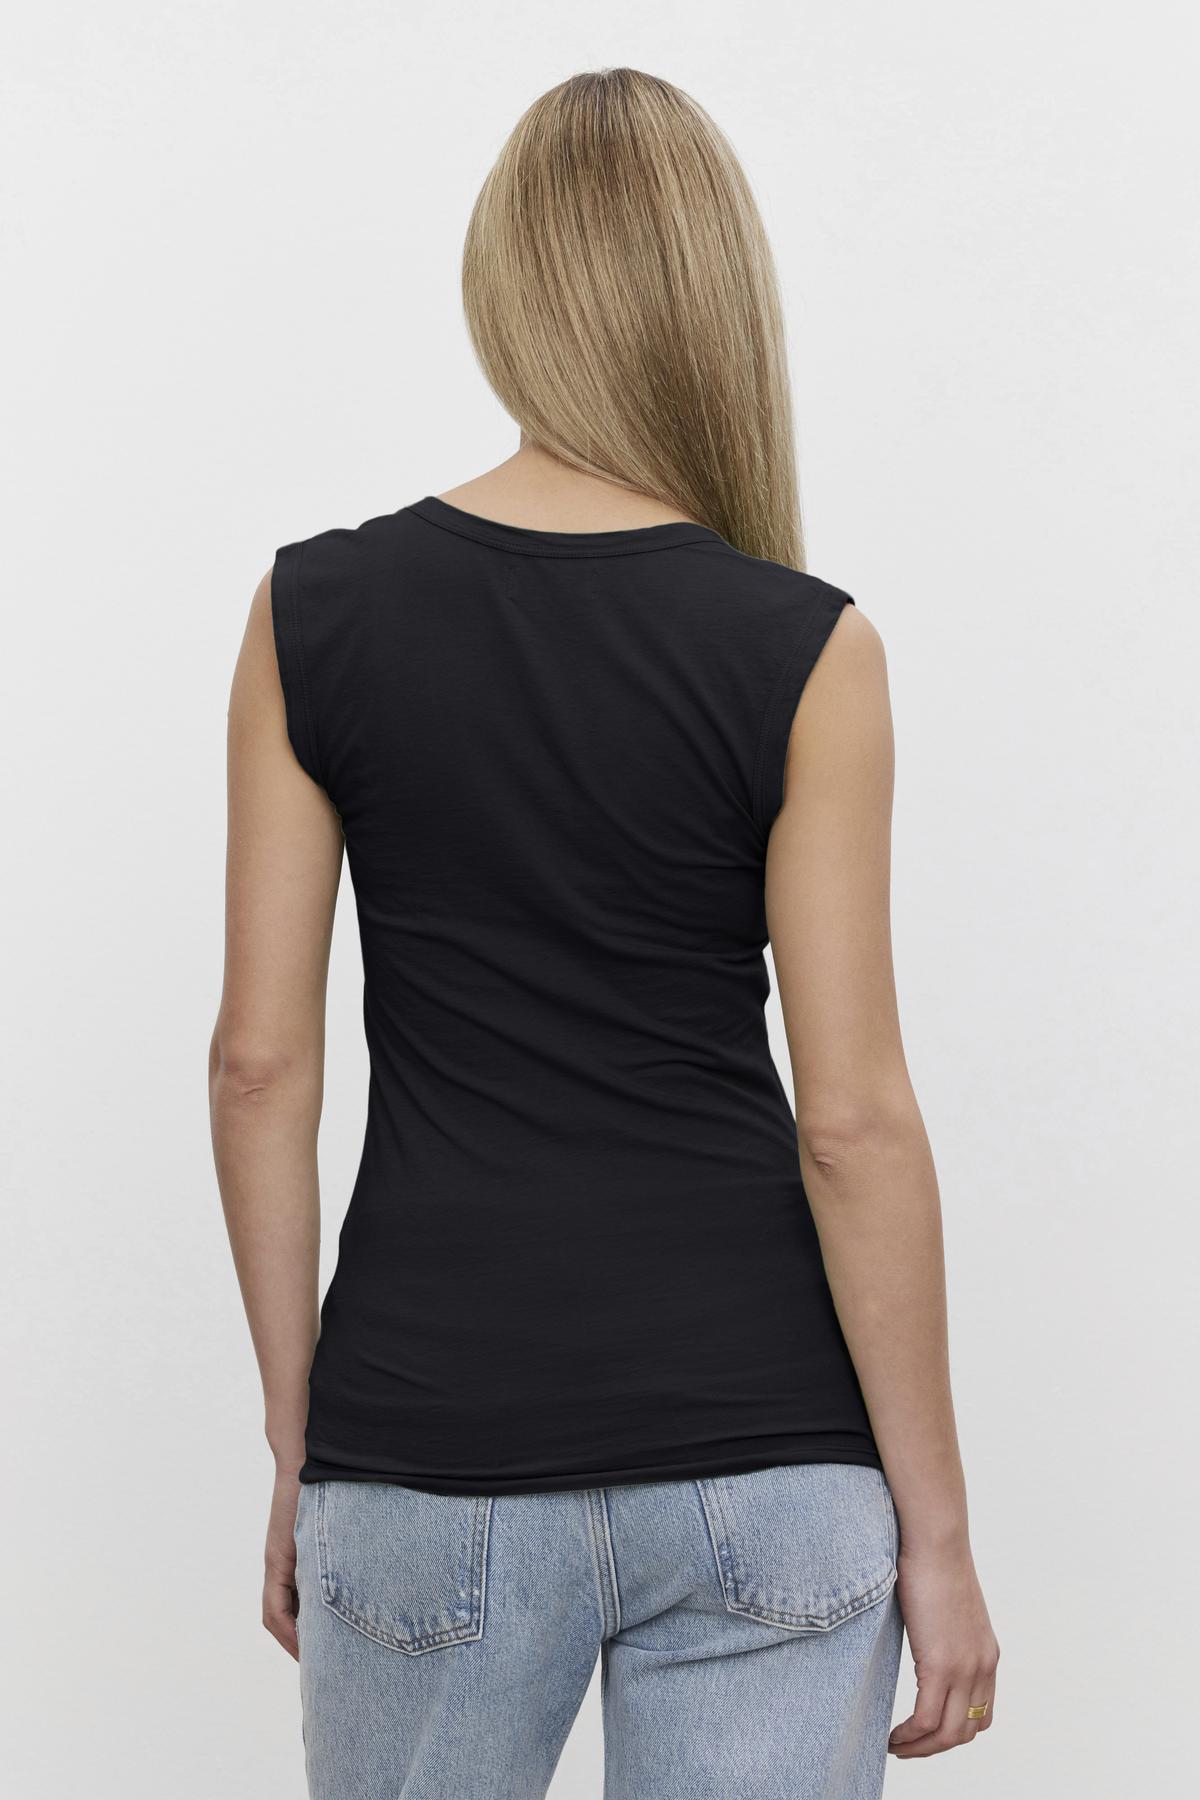 A person with long, straight hair is shown from the back, wearing a black ESTINA TANK TOP by Velvet by Graham & Spencer and light blue jeans against a plain white background.-36266808377537